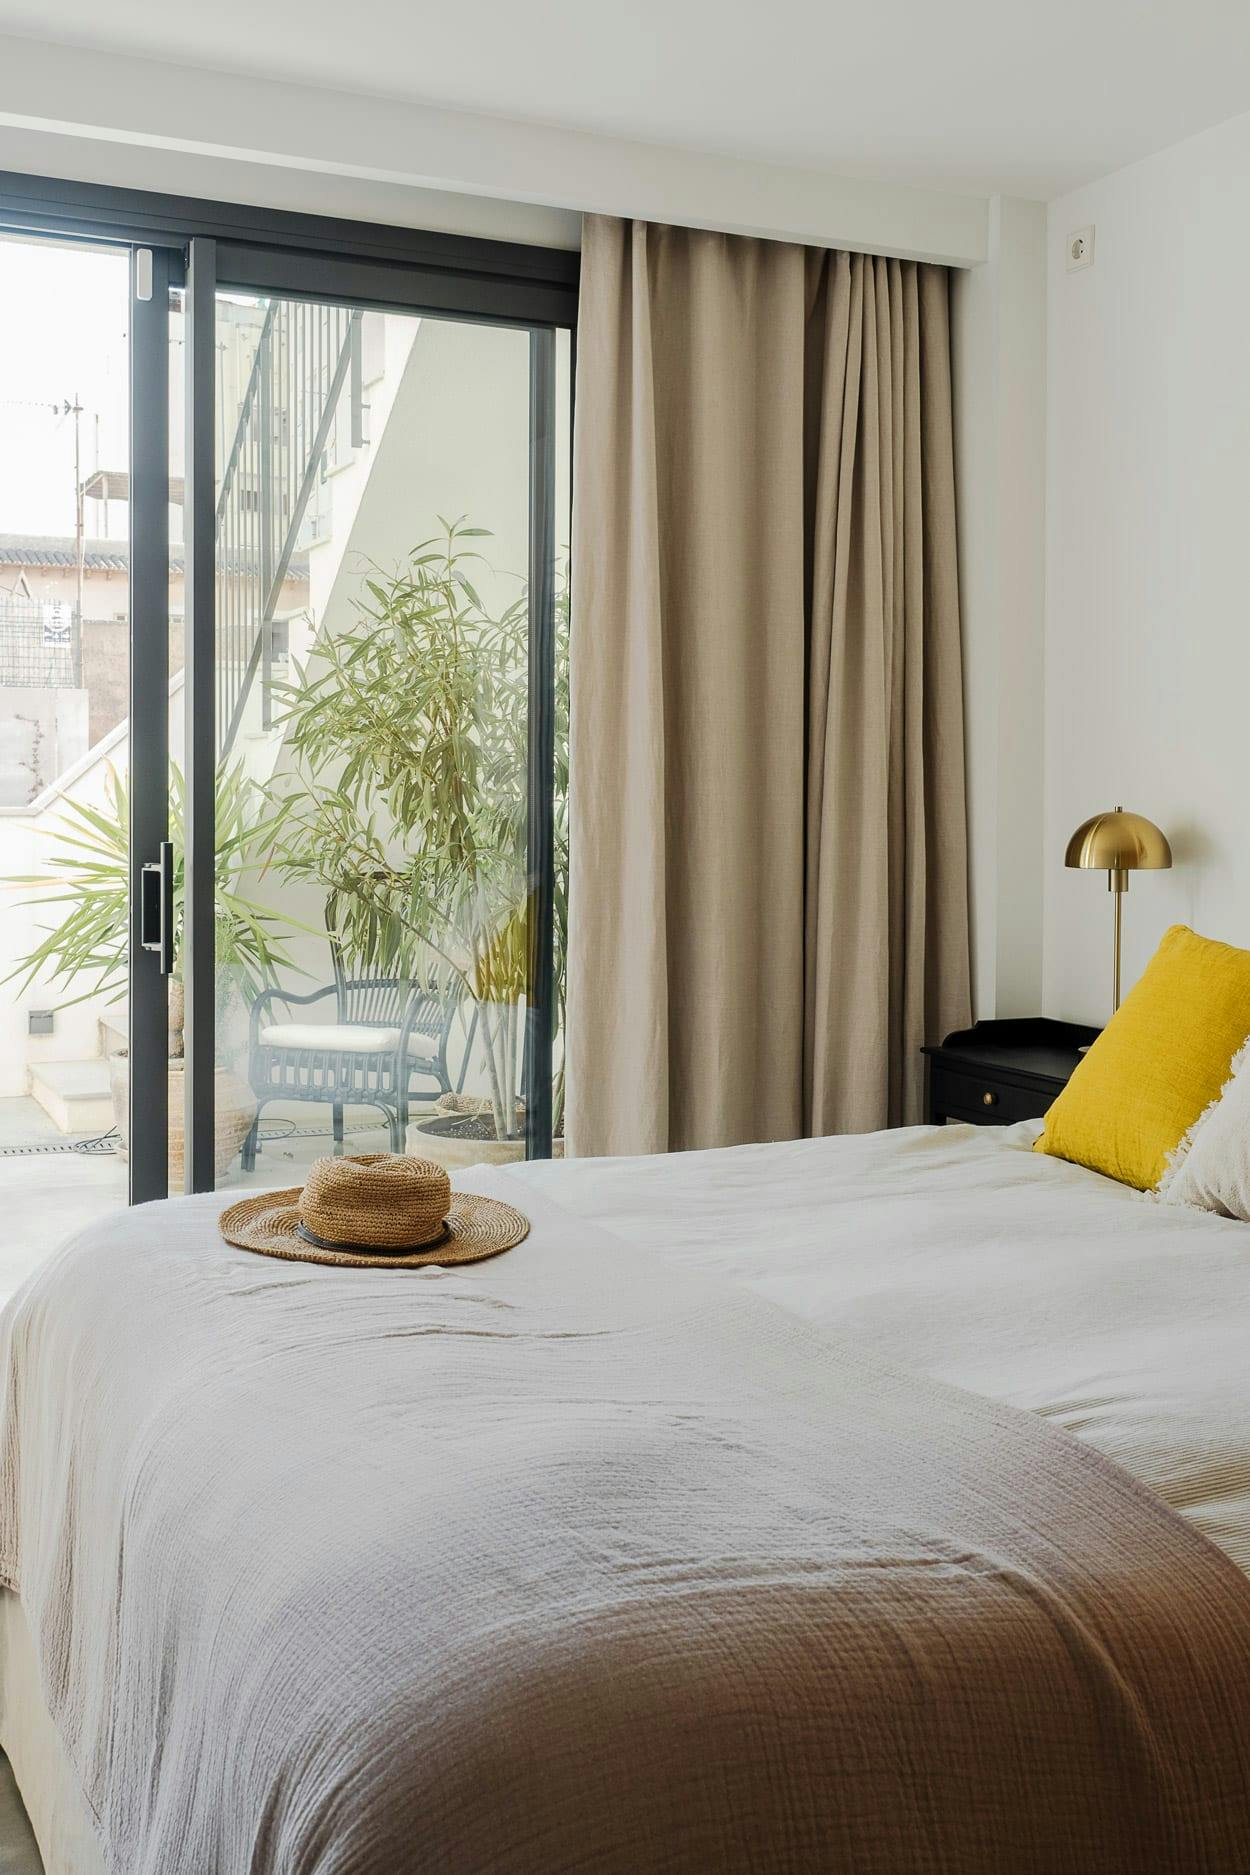 The image features a neatly made bed with a white comforter and a yellow pillow, placed next to a window with a view of a city. There is a chair and a potted plant nearby, and a handbag is also present in the room.